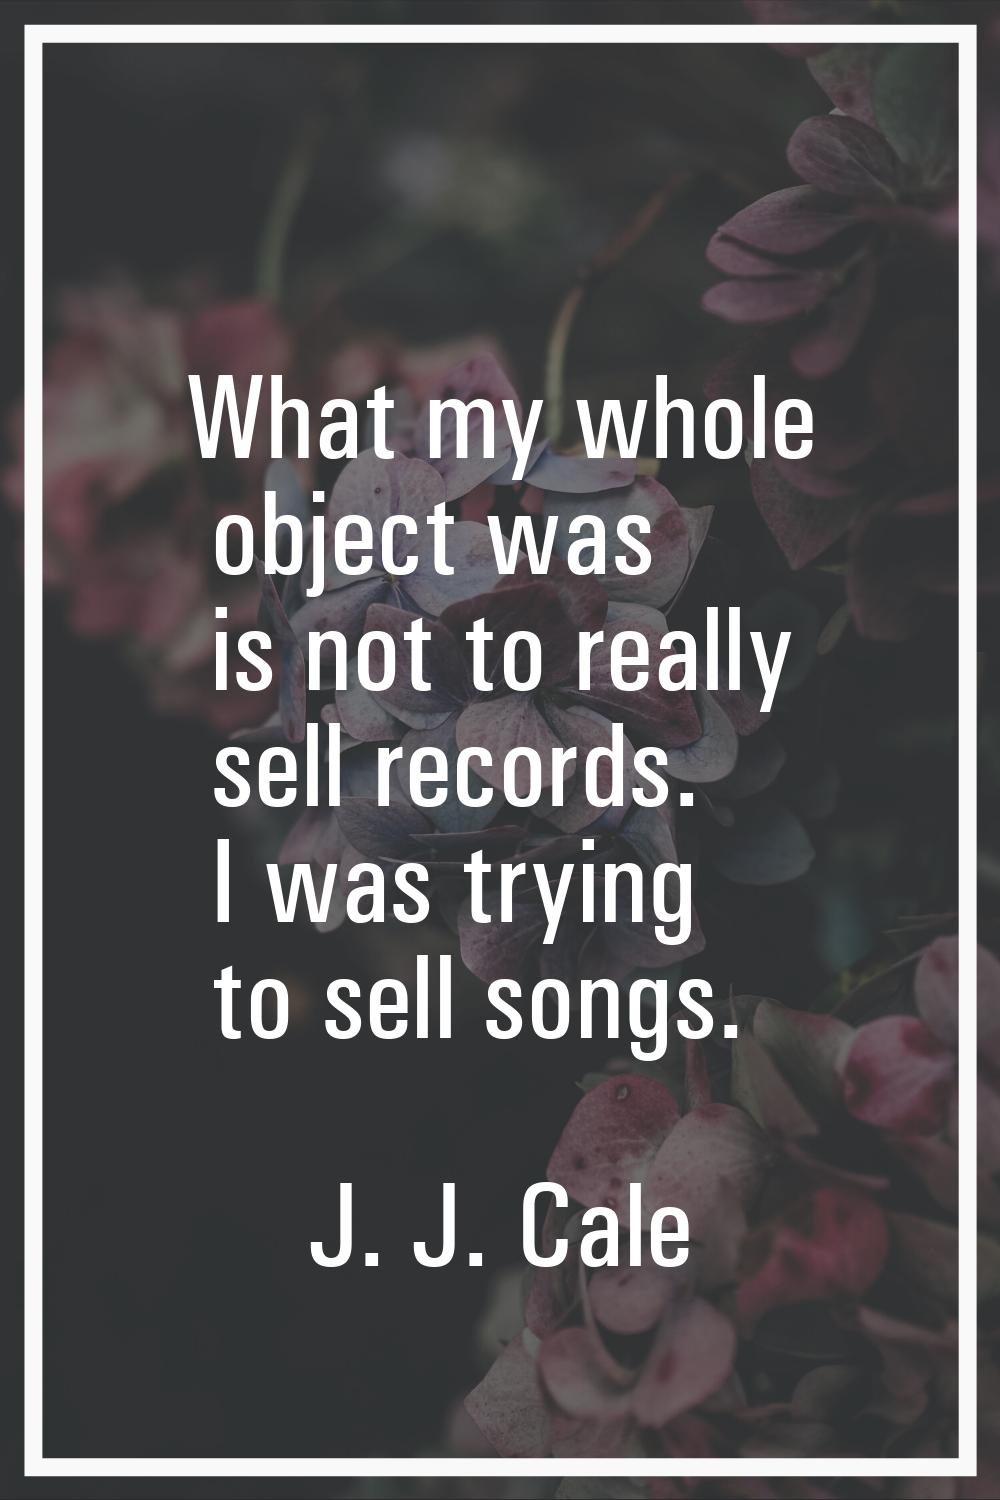 What my whole object was is not to really sell records. I was trying to sell songs.